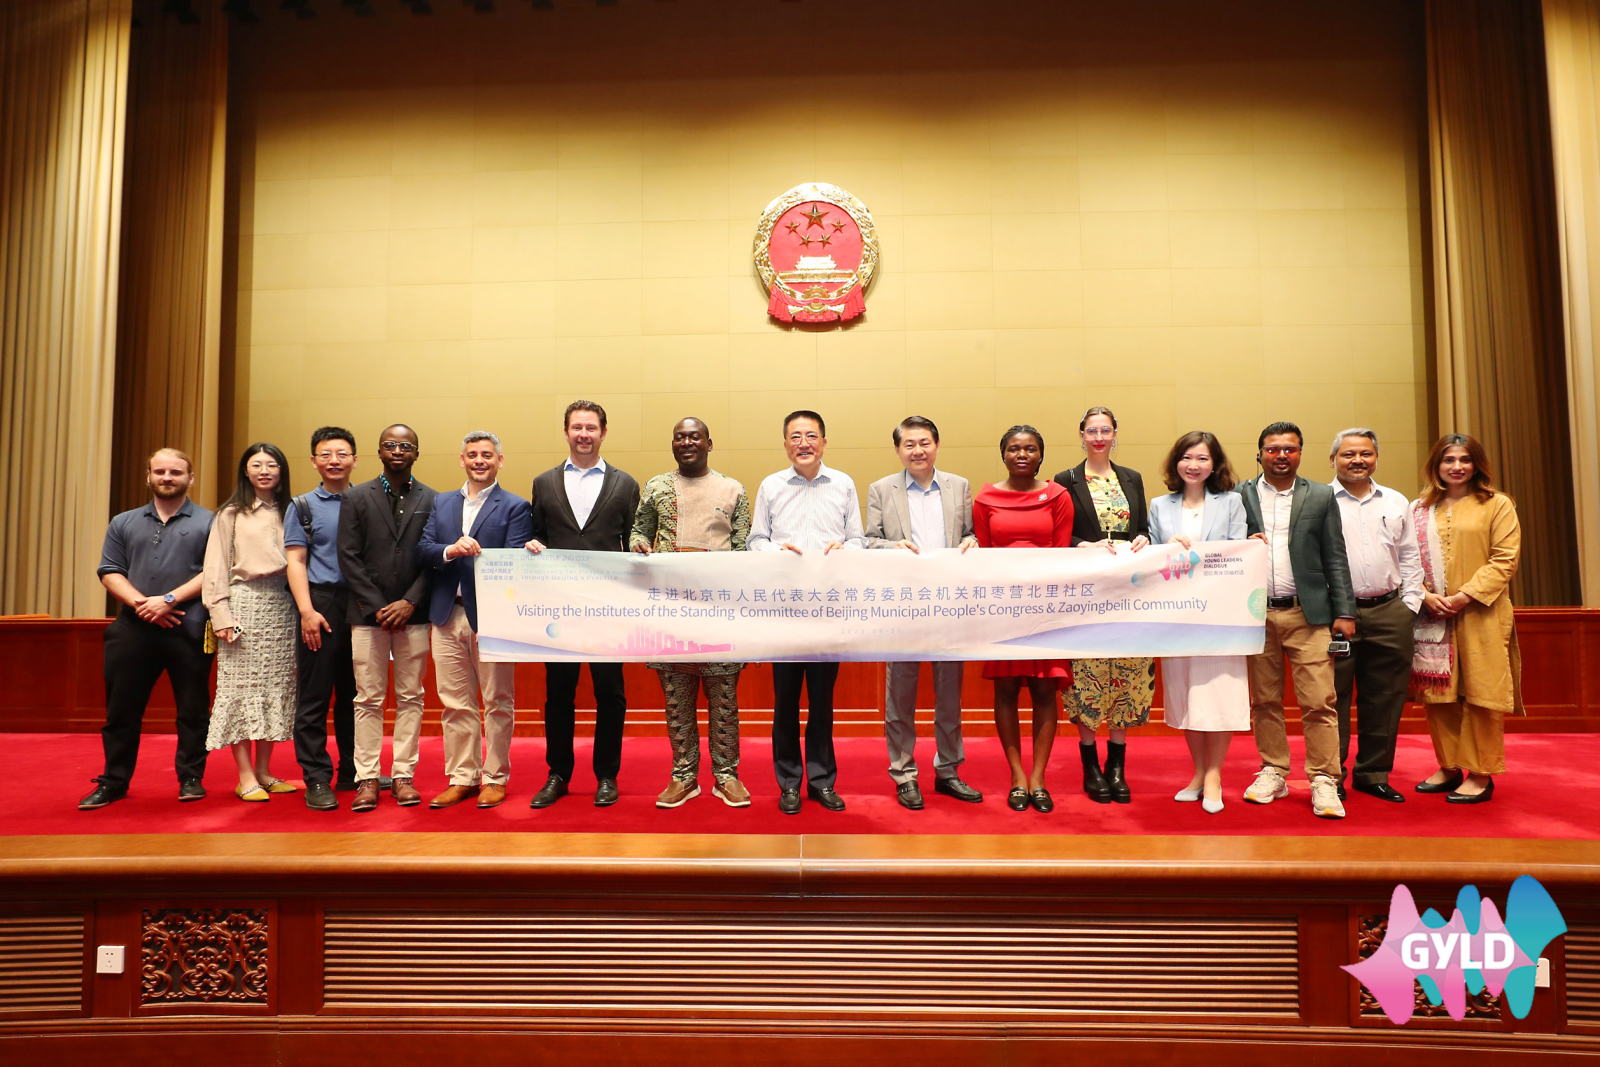 A group of foreign youth representatives visited the Beijing Municipal People's Congress as part of the program titled 